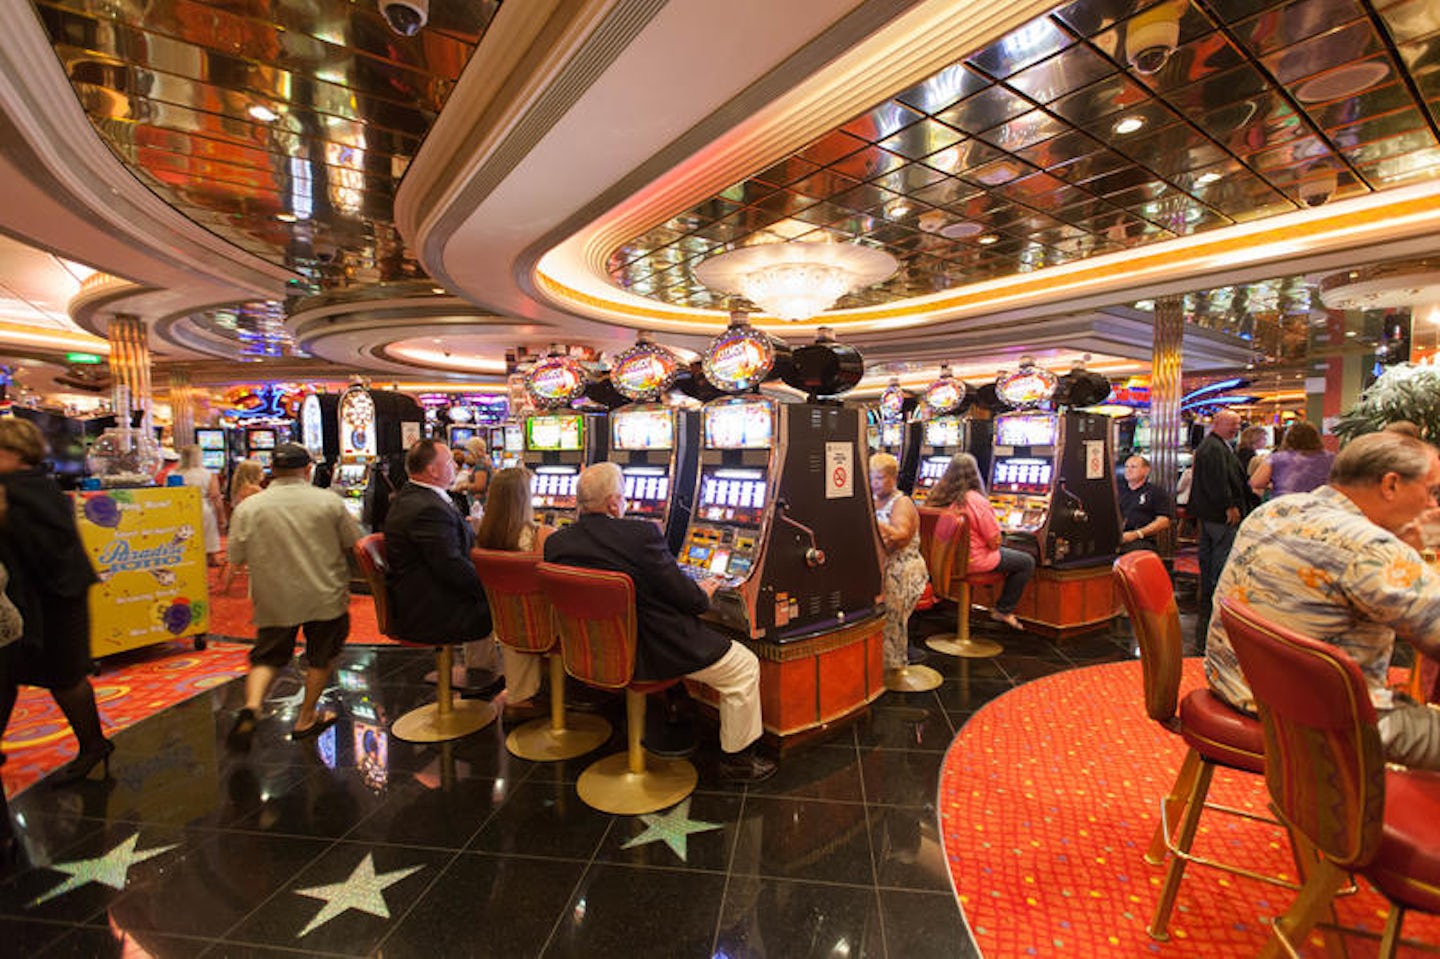 Casino Royale on Independence of the Seas